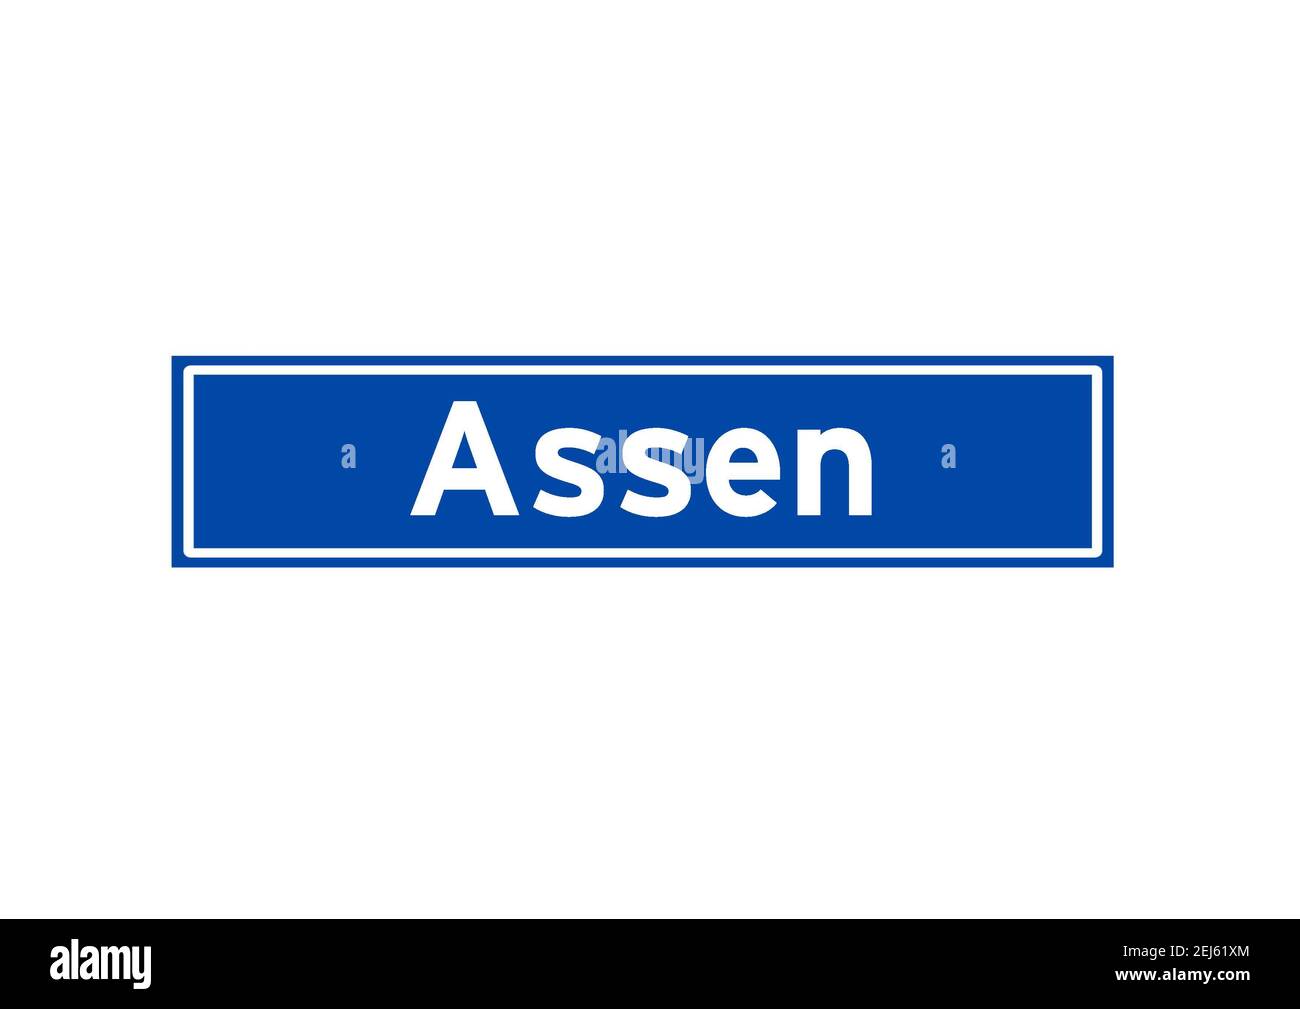 Assen isolated Dutch place name sign. City sign from the Netherlands. Stock Photo